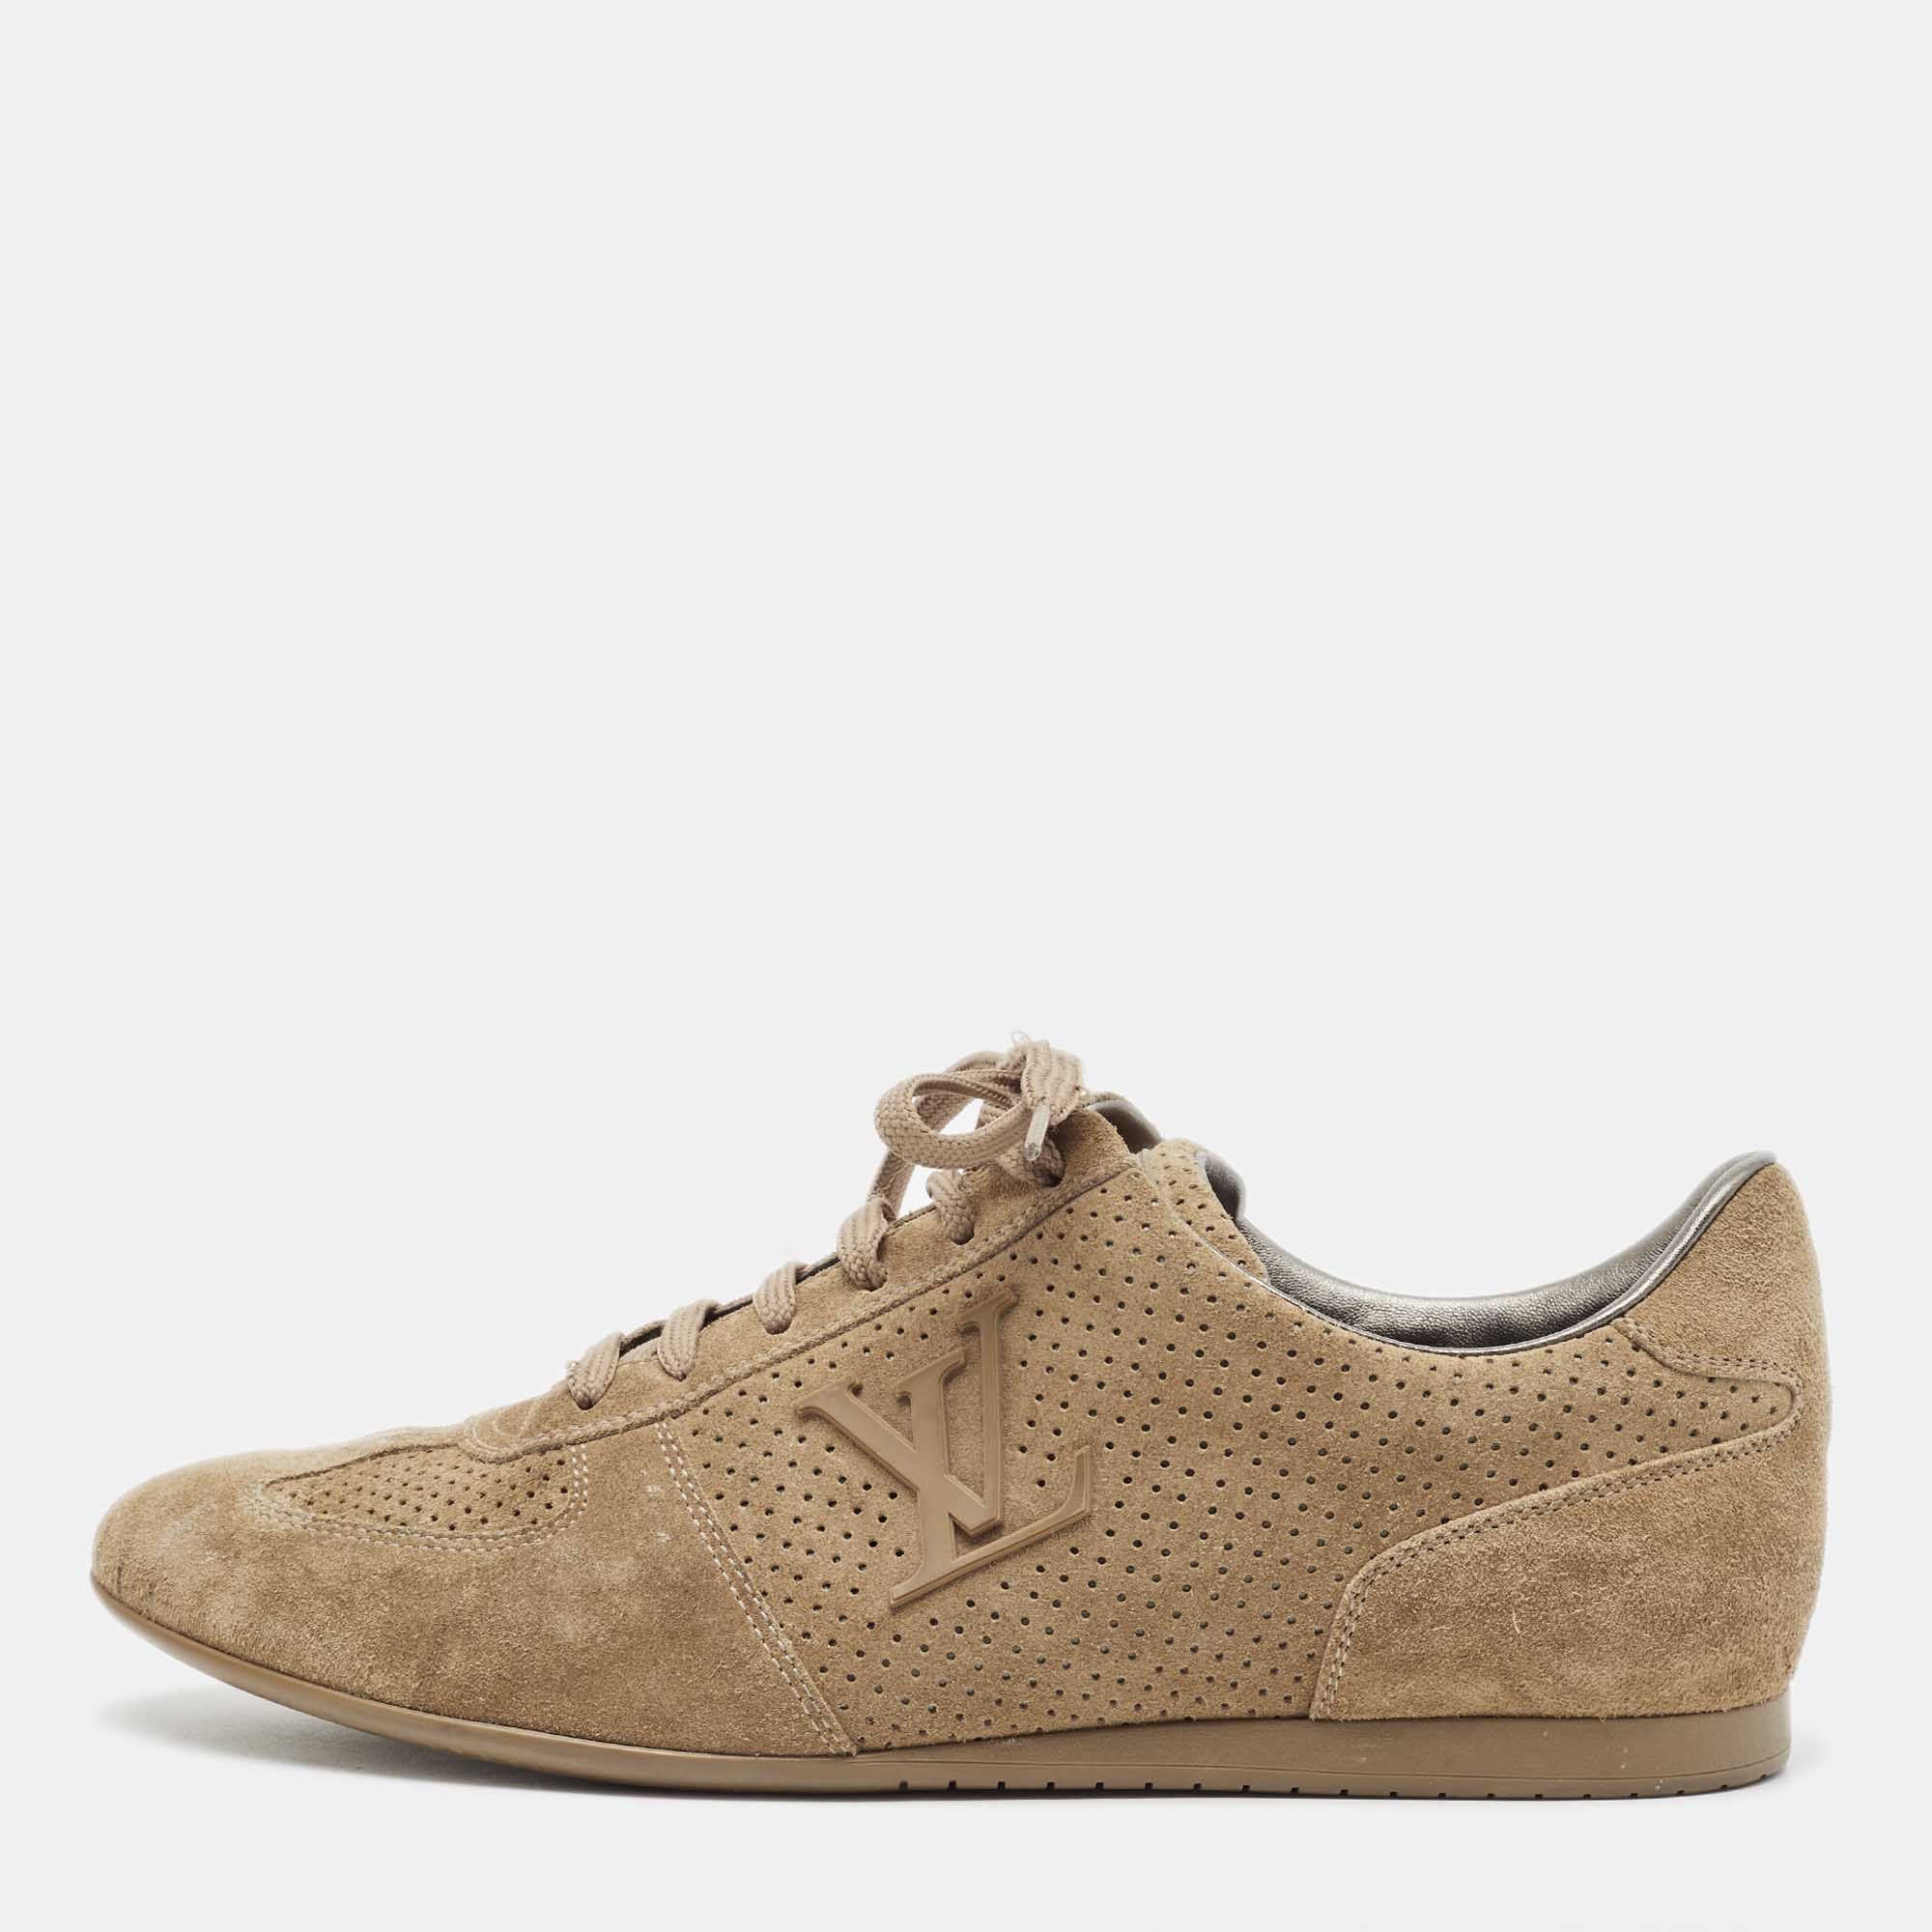 Louis vuitton beige perforated suede low top sneakers size 38